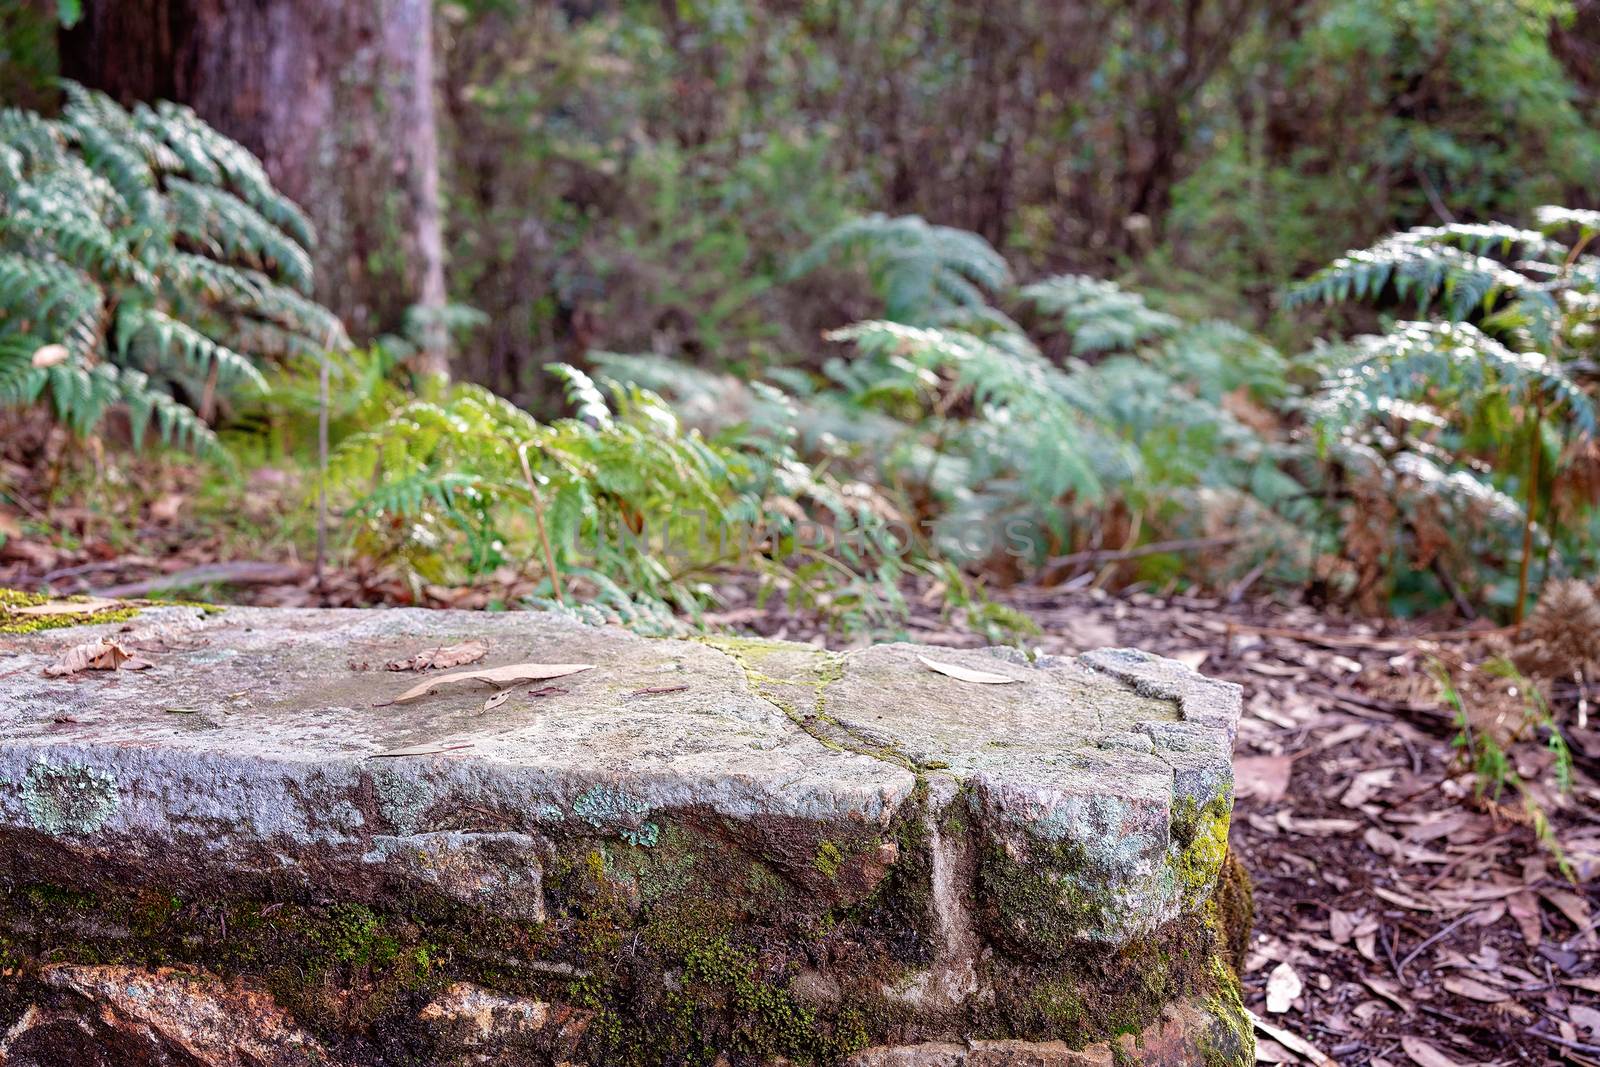 Ferns behind a moss covered textured low rock wall in the bush